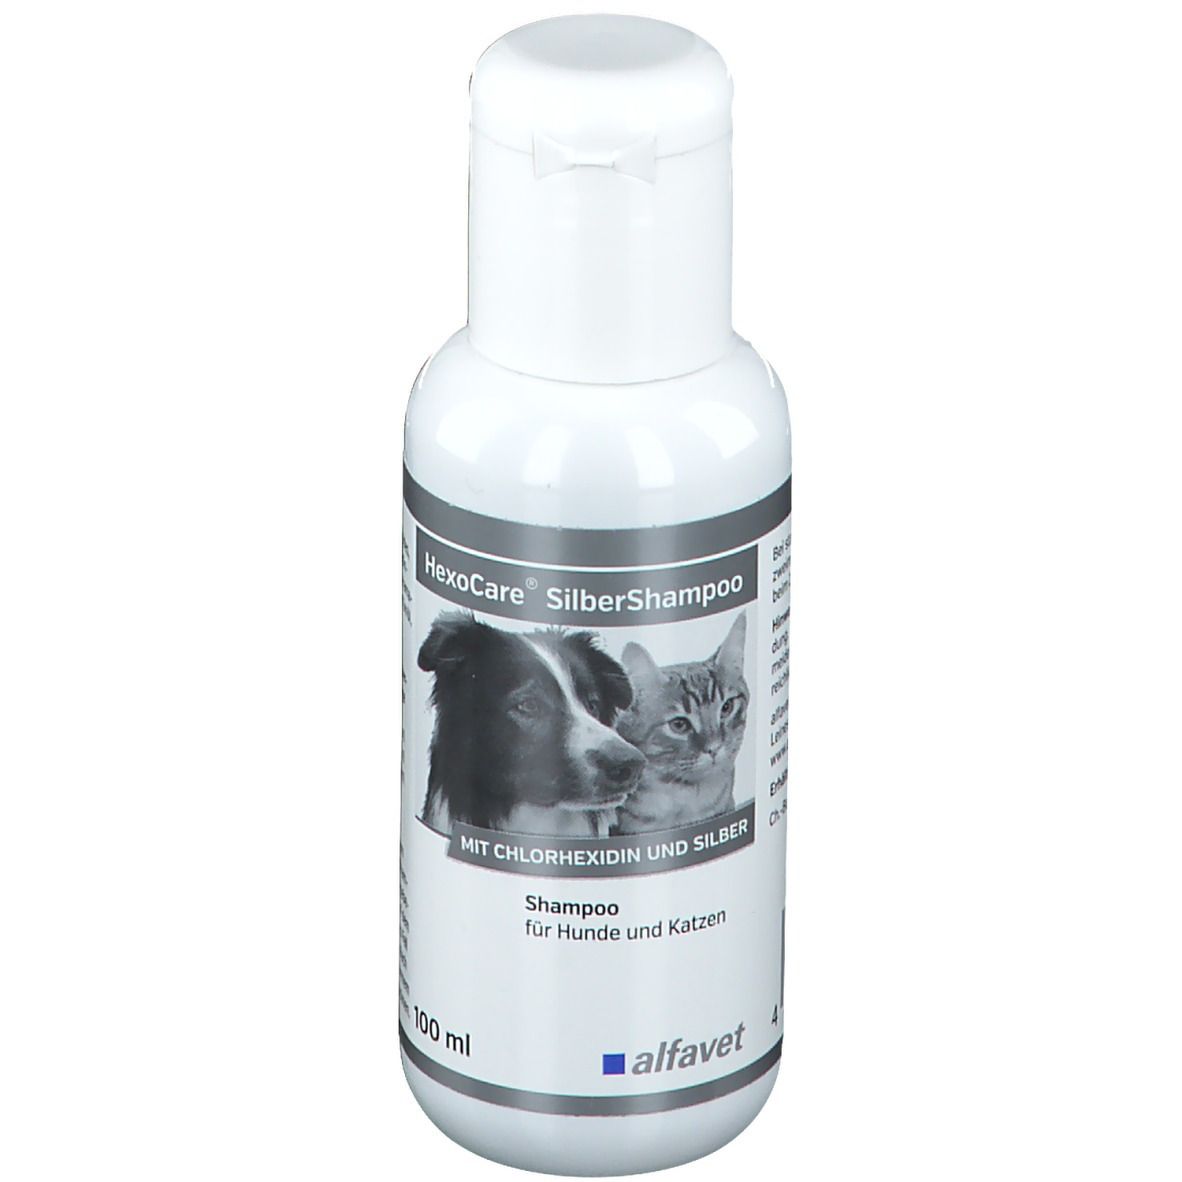 Image of HexoCare® Silber Shampoo